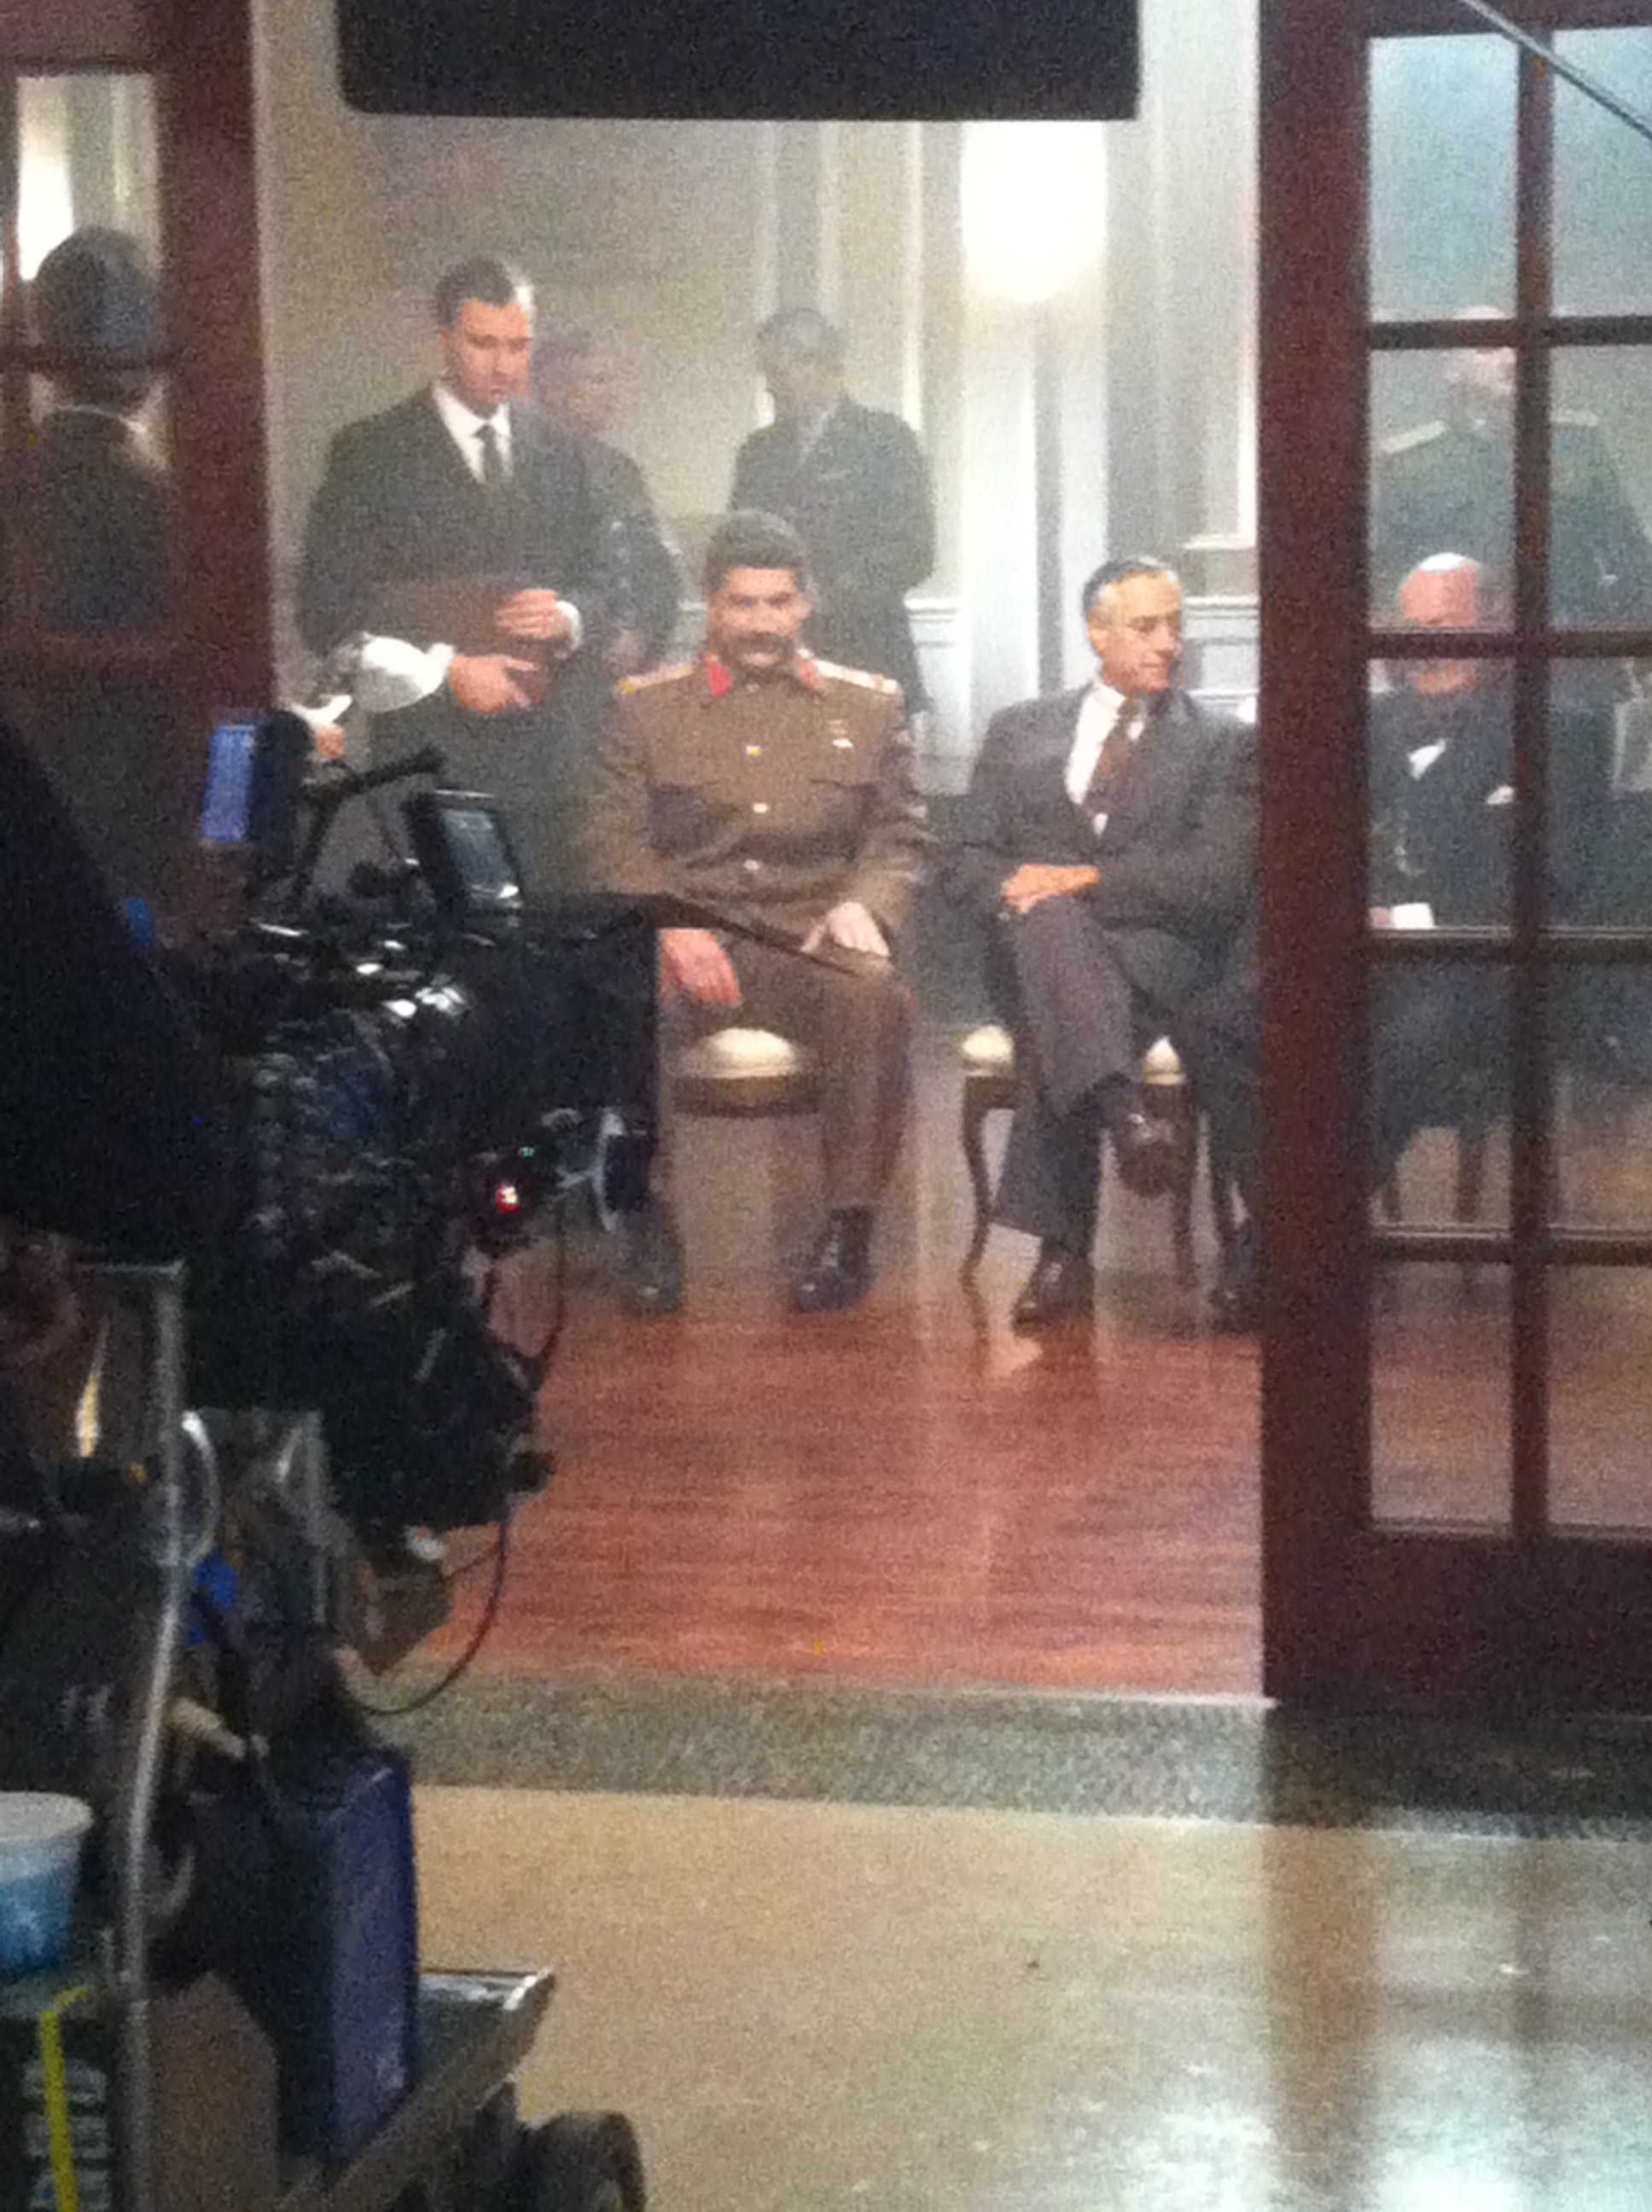 Stalin,FDR and Churchill. The World Wars History Channel